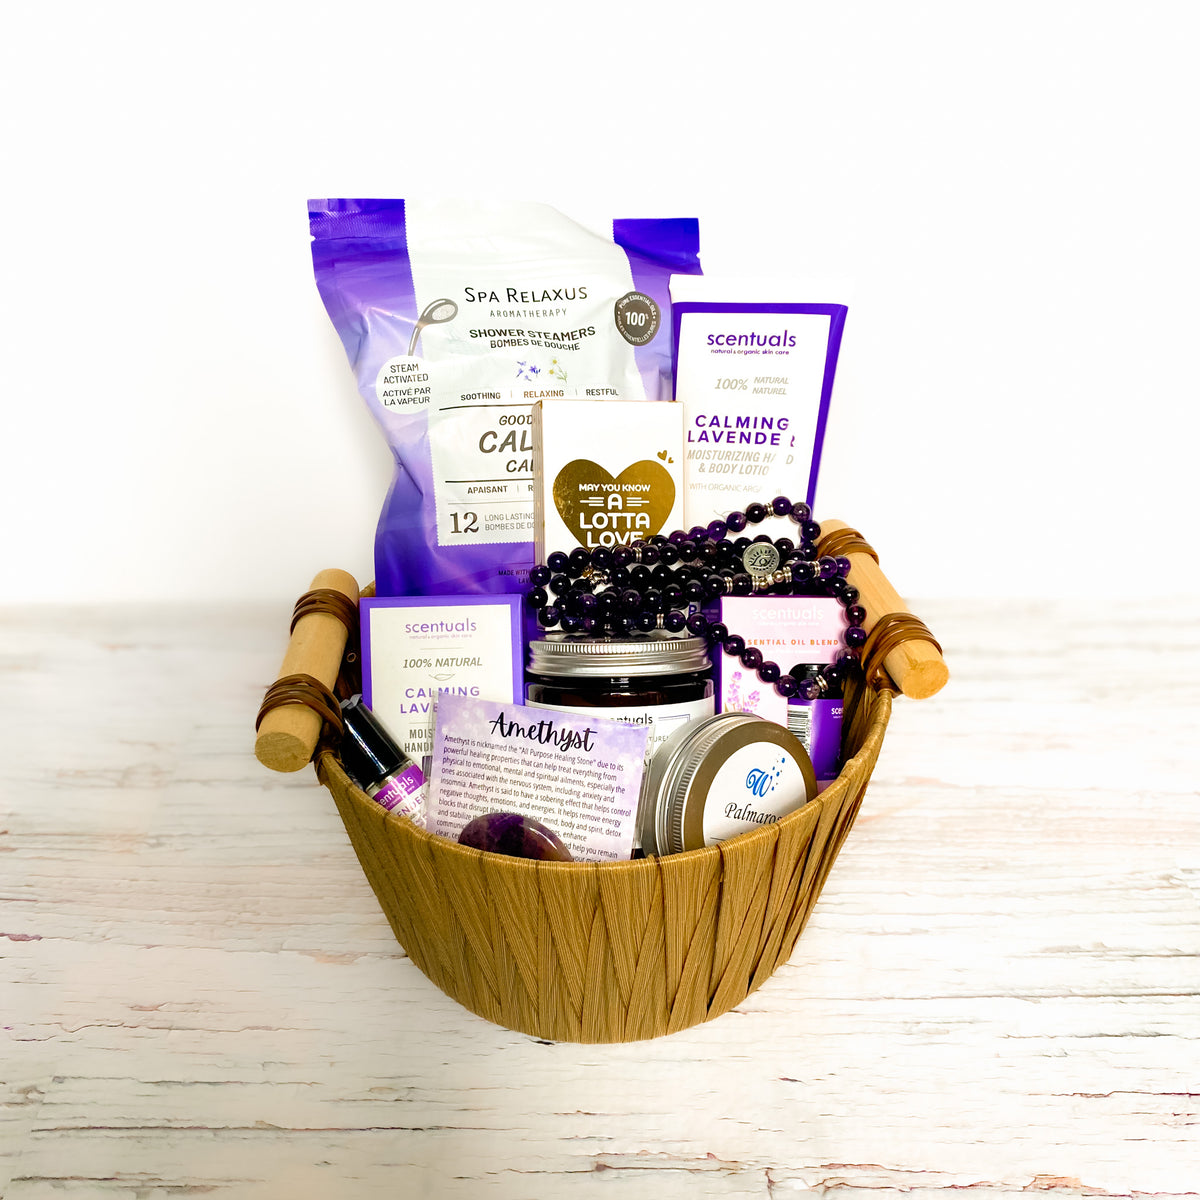 wellness box, wellness gift set, unisex gift sets, corporate gifts, gift baskets, lavender gifts, relaxation sets, relaxation gifts, unique gift baskets, different gift baskets, mental health gifts, relaxation items, calming tools, self care items,